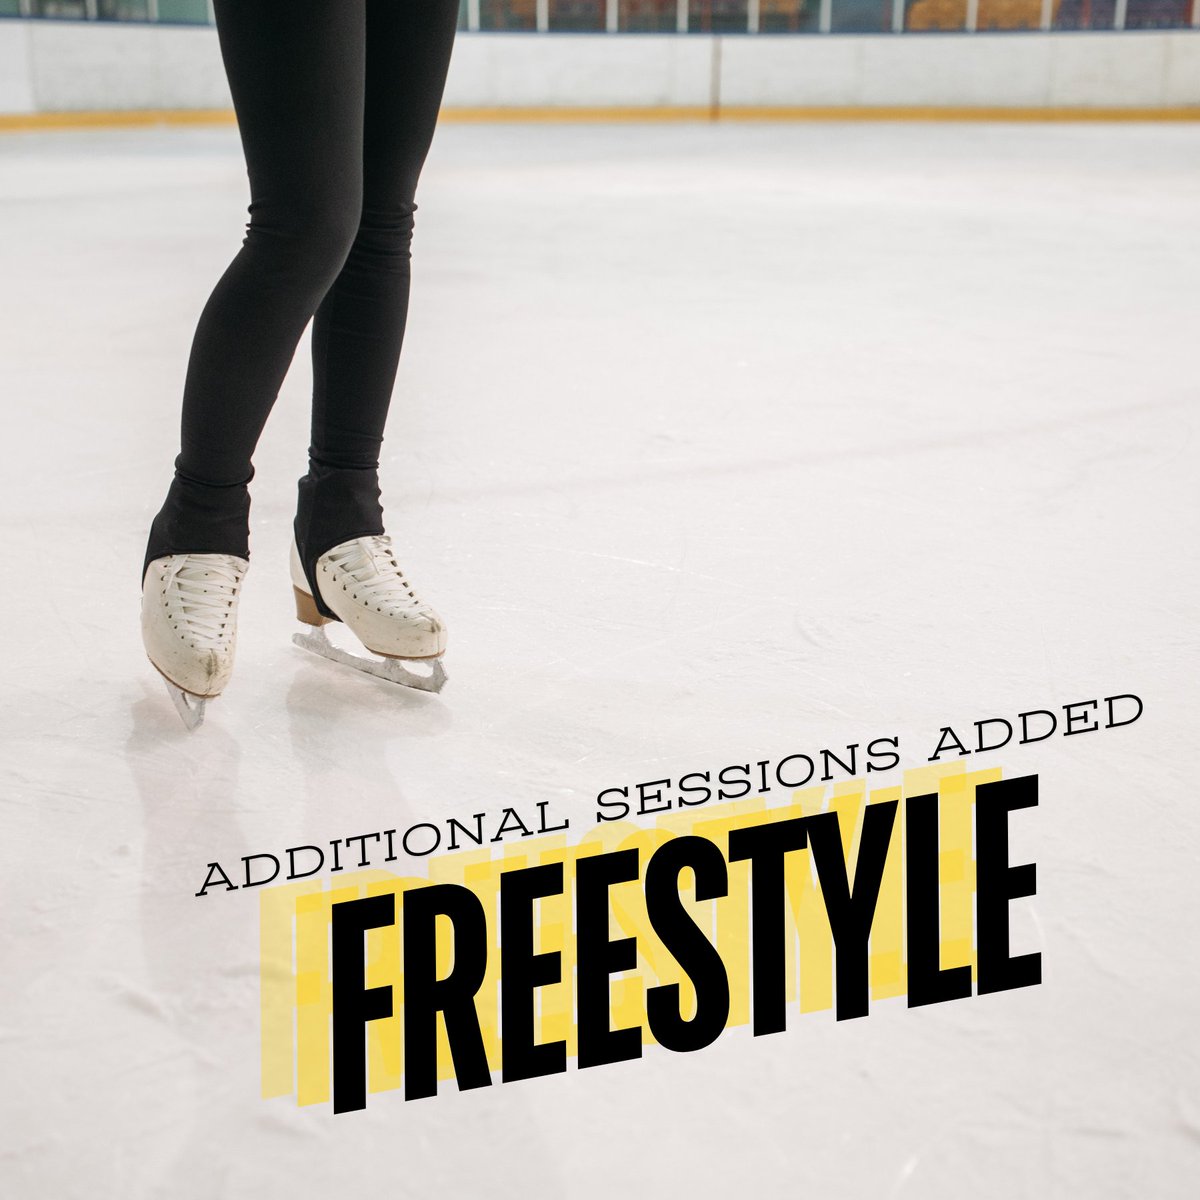 ATTN: Figure Skaters⛸We've added multiple Freestyle sessions over the coming weeks! Check out the upcoming schedule and join us for training and rehearsing on the ice. More--> bit.ly/FSCCIC